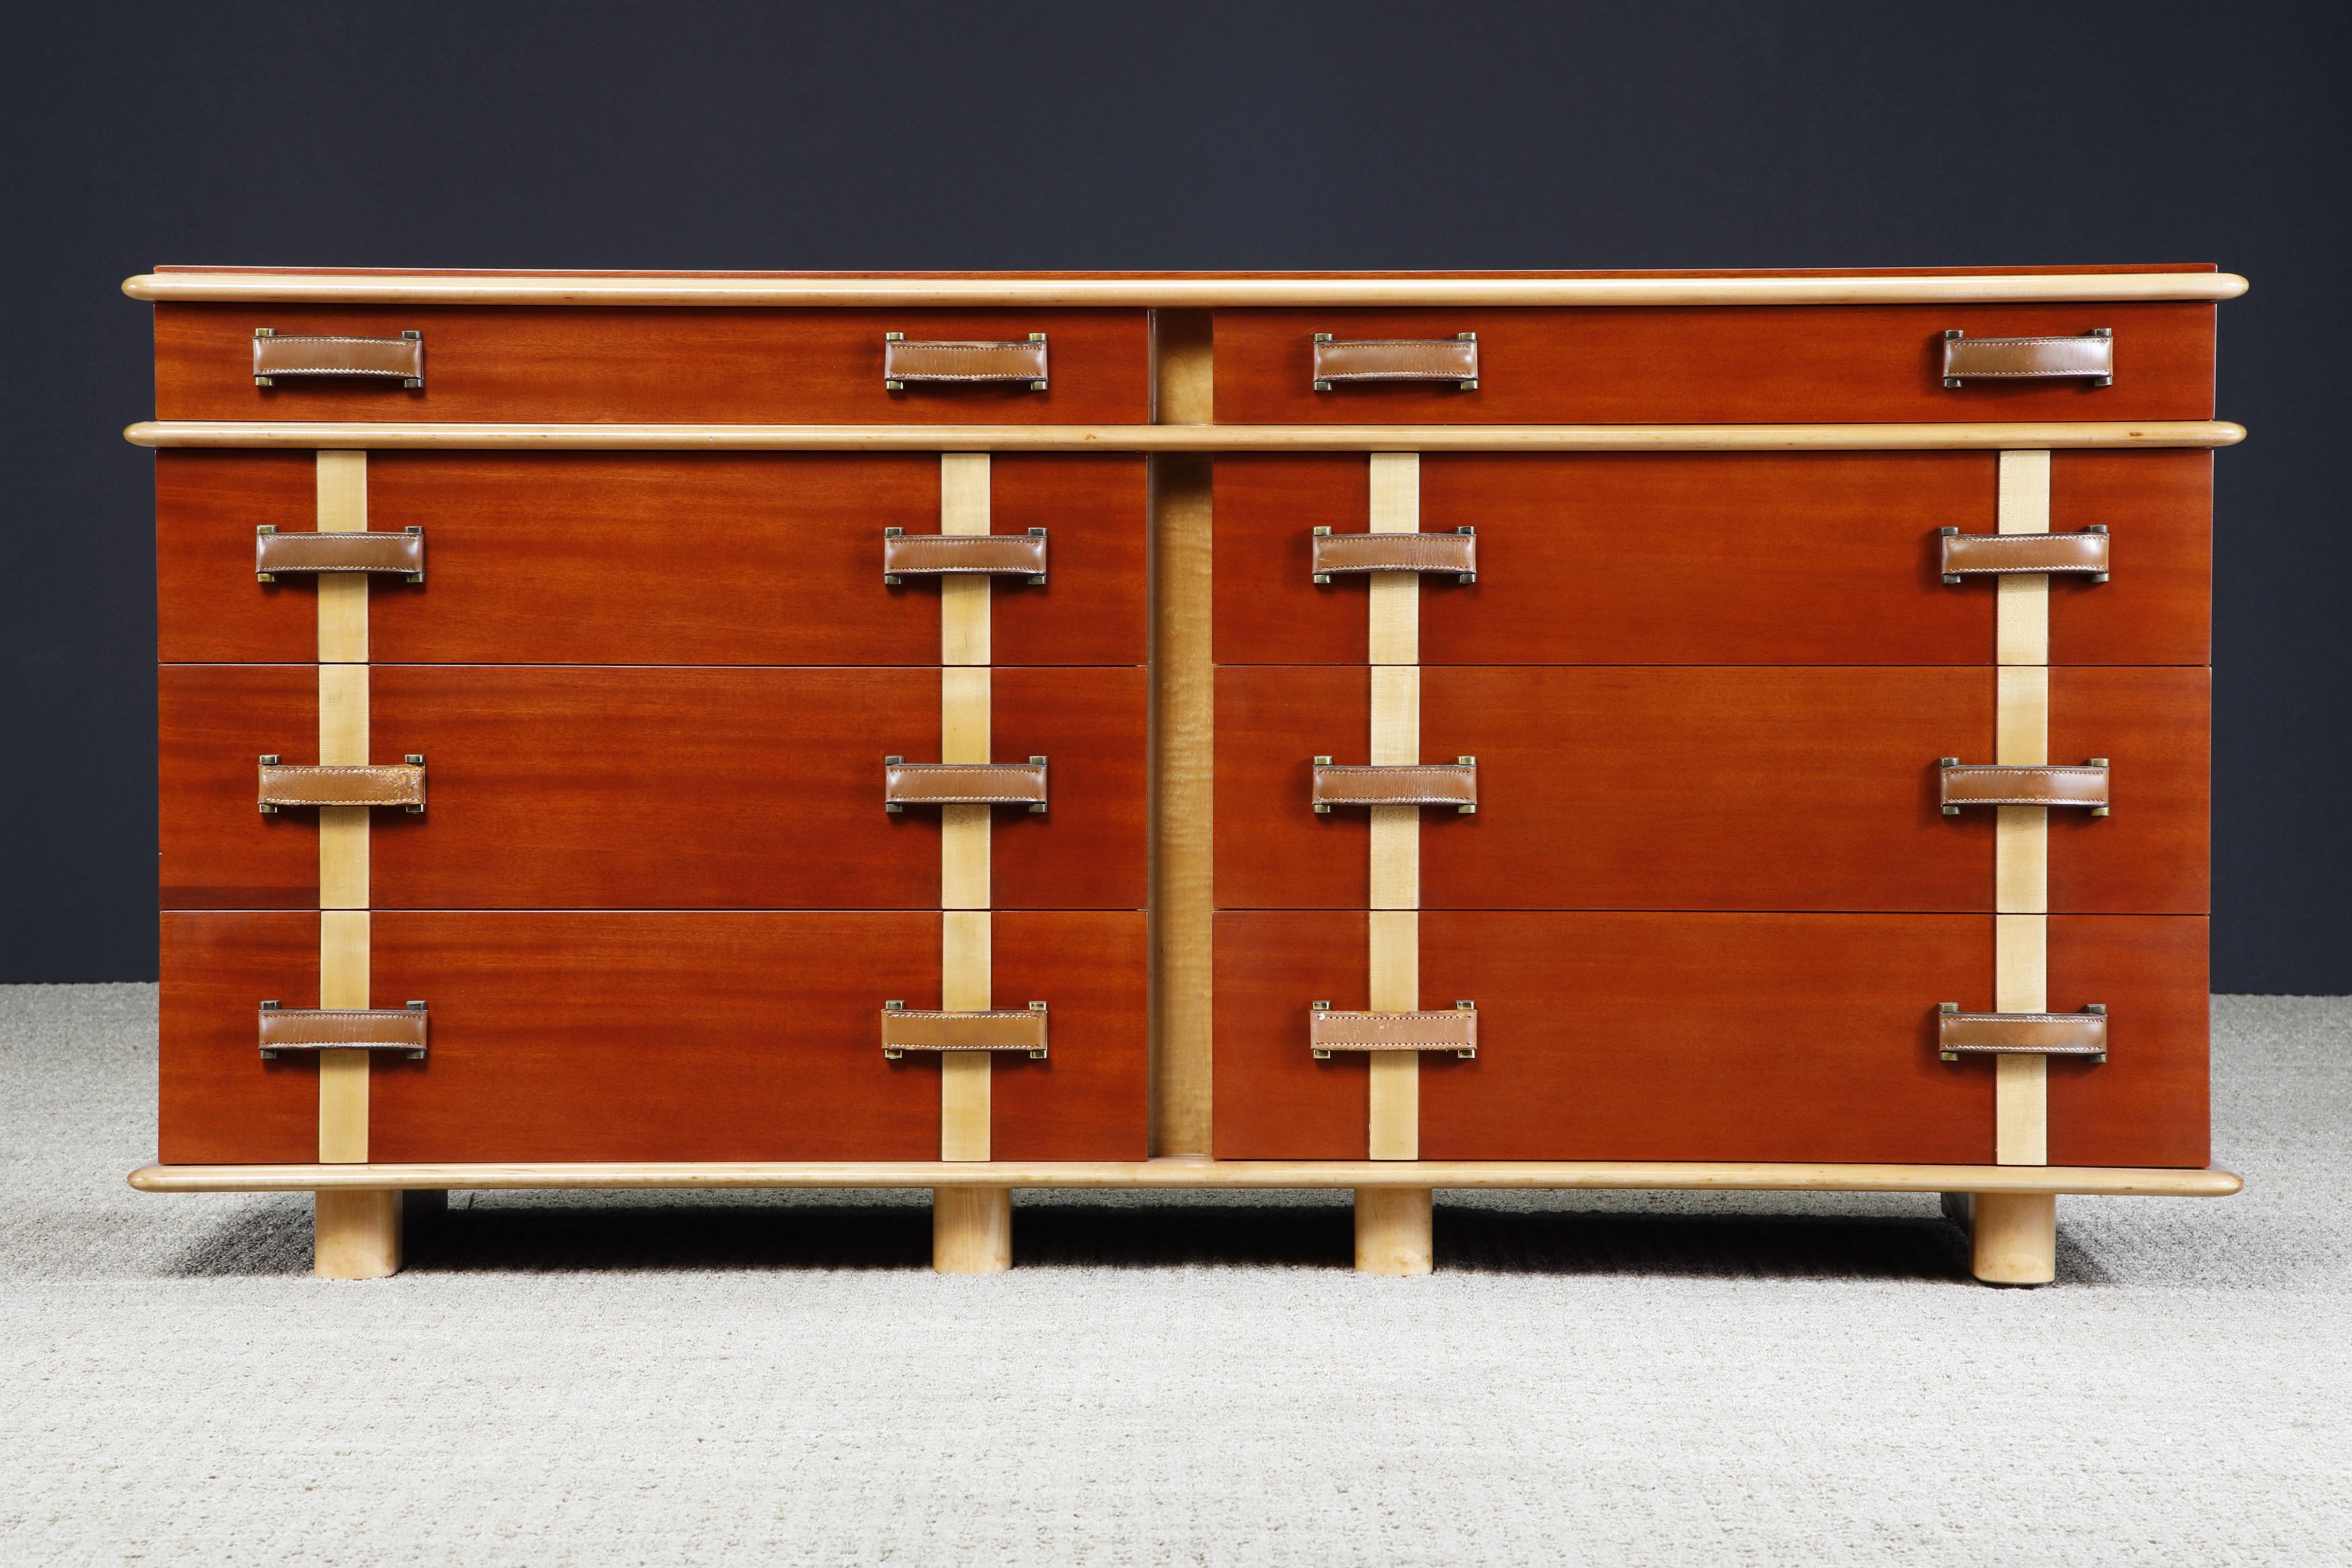 This rare collectors piece is by Paul T. Frankl for Johnson Furniture, circa 1945, and from the 'Station Wagon' series of bedroom furniture. Beautifully contrasting Mahogany and Maple refinished with an expensive French Polish; for the best of both